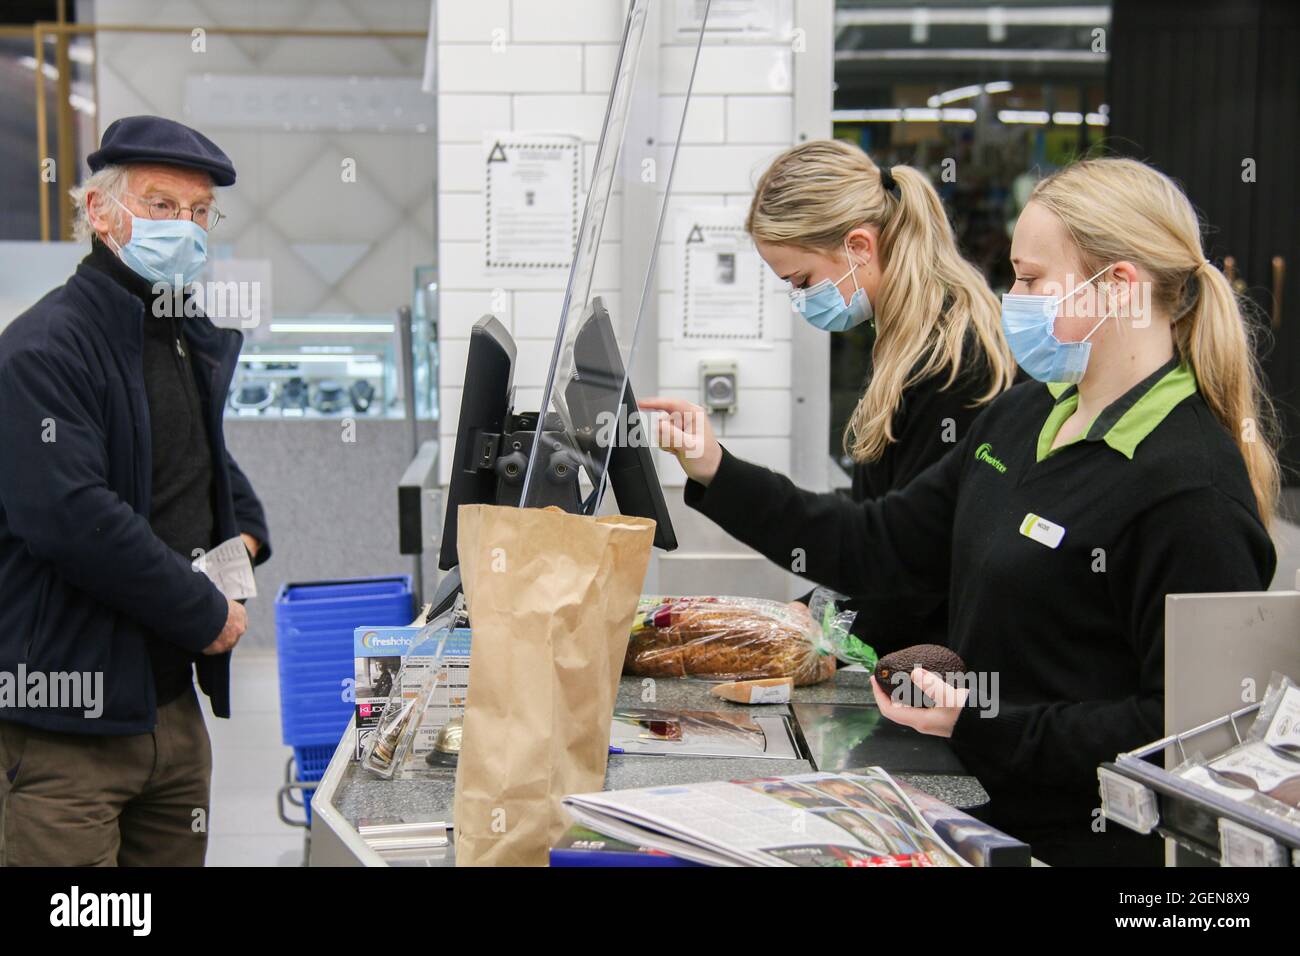 Fresh choice supermarket Staff members wearing face masks as a preventive measure against the spread of coronavirus serve a customer during the lockdown.New Zealand's outbreak of the Delta variant has so far seen 28 confirmed cases in Auckland, and three in Wellington. Prime Minister Jacinda Ardern yesterday placed areas outside Auckland and Coromandel into a further lockdown until 11.59 pm on Tuesday. Deputy Prime Minister Grant Robertson said this morning, “things will get worse before they get better”, and that “there will be more cases”. He said he hadn't yet had the update on today's numb Stock Photo